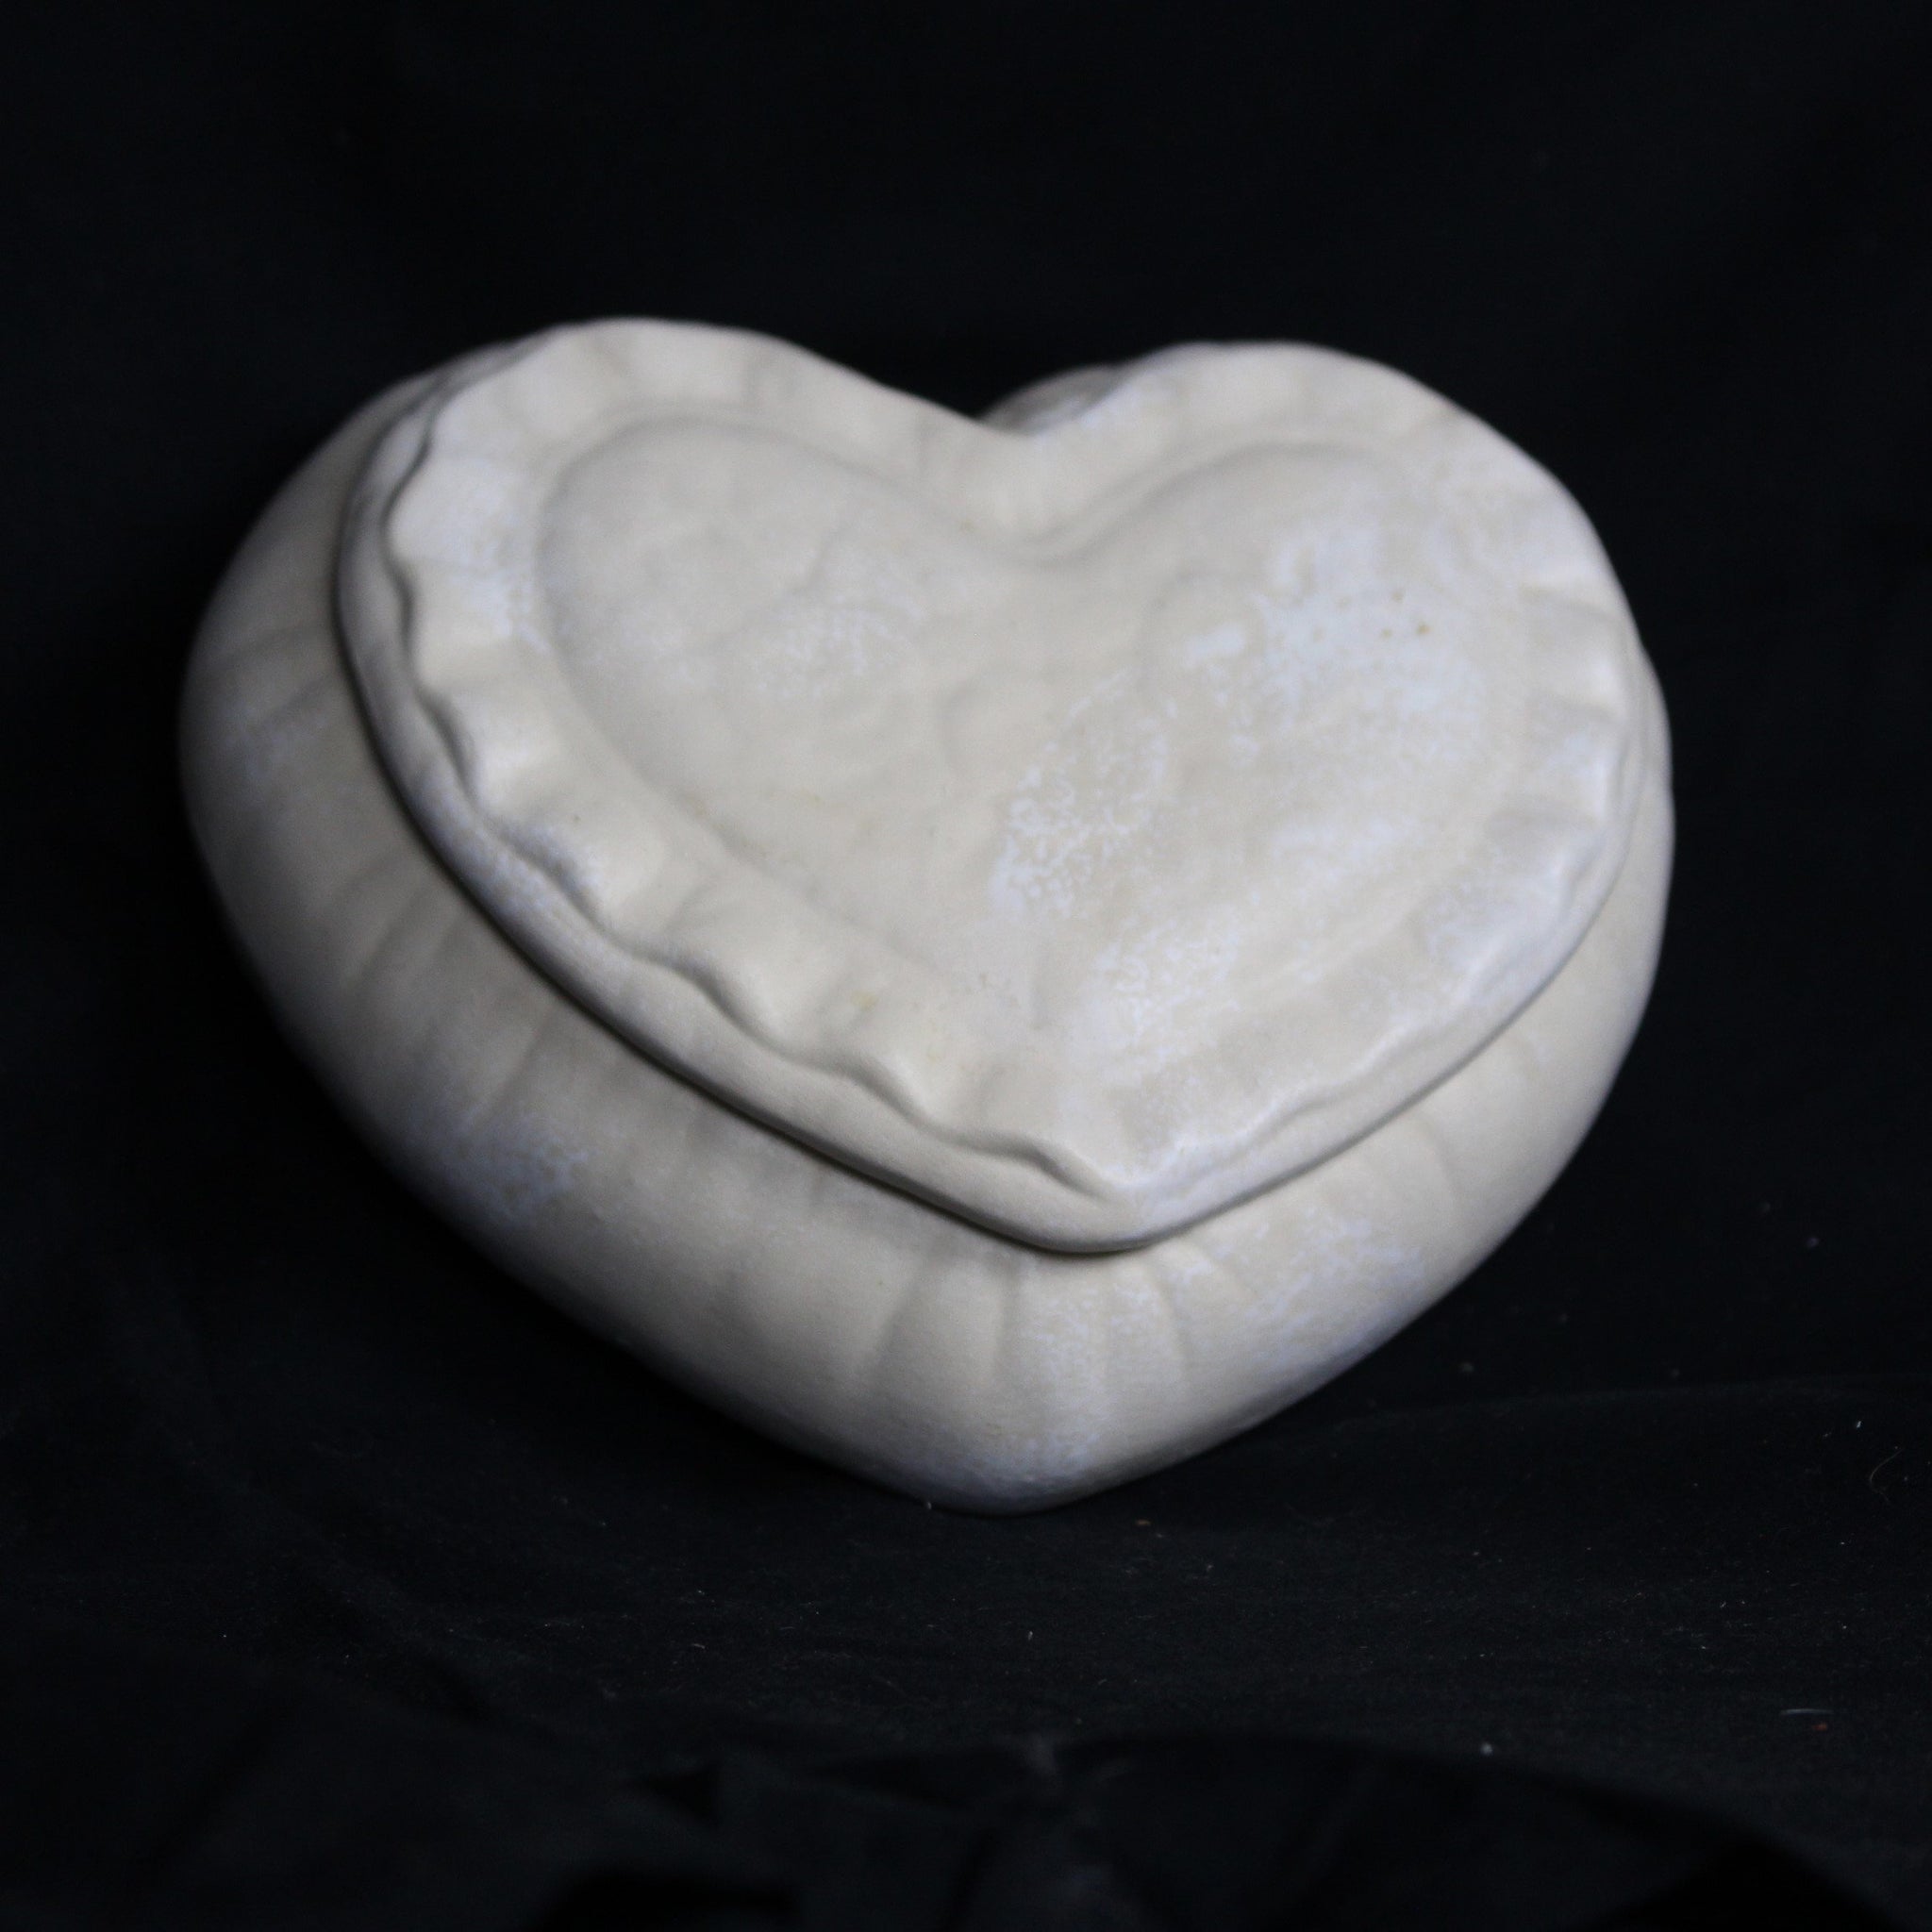 Vintage Heart Shaped Ceramic Container